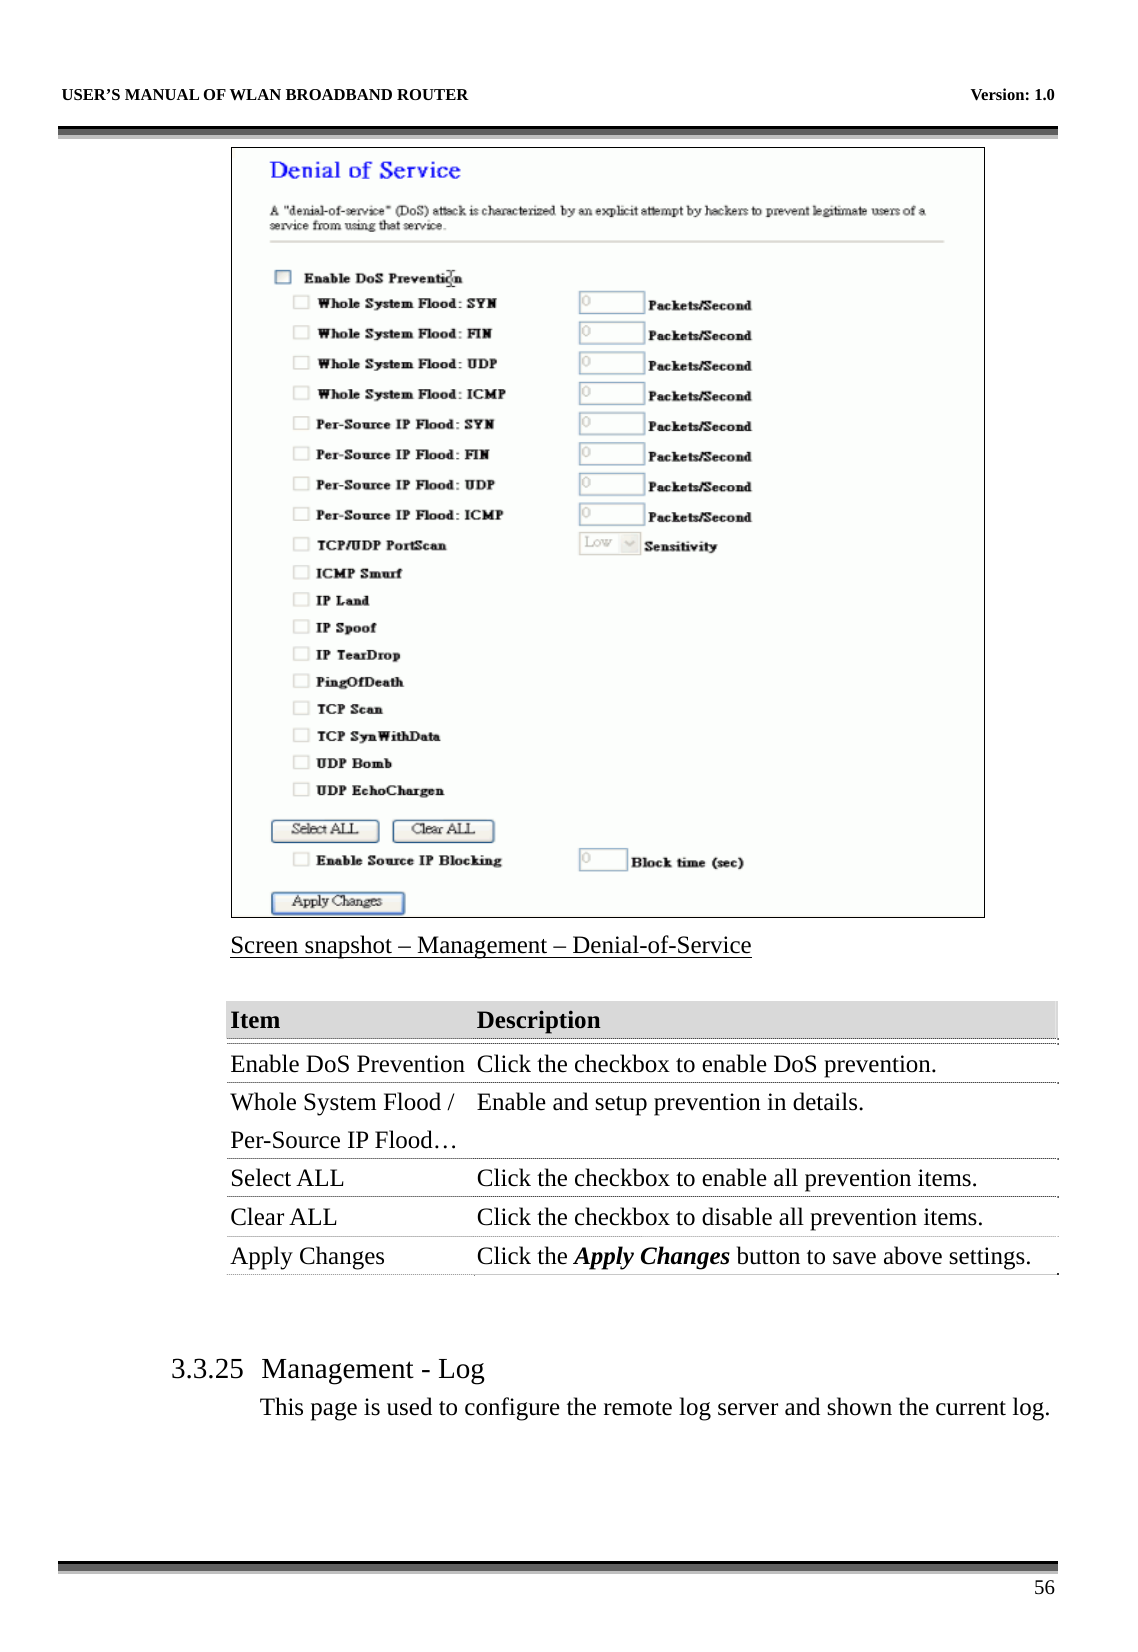   USER’S MANUAL OF WLAN BROADBAND ROUTER    Version: 1.0      56  Screen snapshot – Management – Denial-of-Service  Item  Description   Enable DoS Prevention Click the checkbox to enable DoS prevention. Whole System Flood / Per-Source IP Flood… Enable and setup prevention in details. Select ALL  Click the checkbox to enable all prevention items. Clear ALL  Click the checkbox to disable all prevention items. Apply Changes  Click the Apply Changes button to save above settings.   3.3.25 Management - Log This page is used to configure the remote log server and shown the current log.  